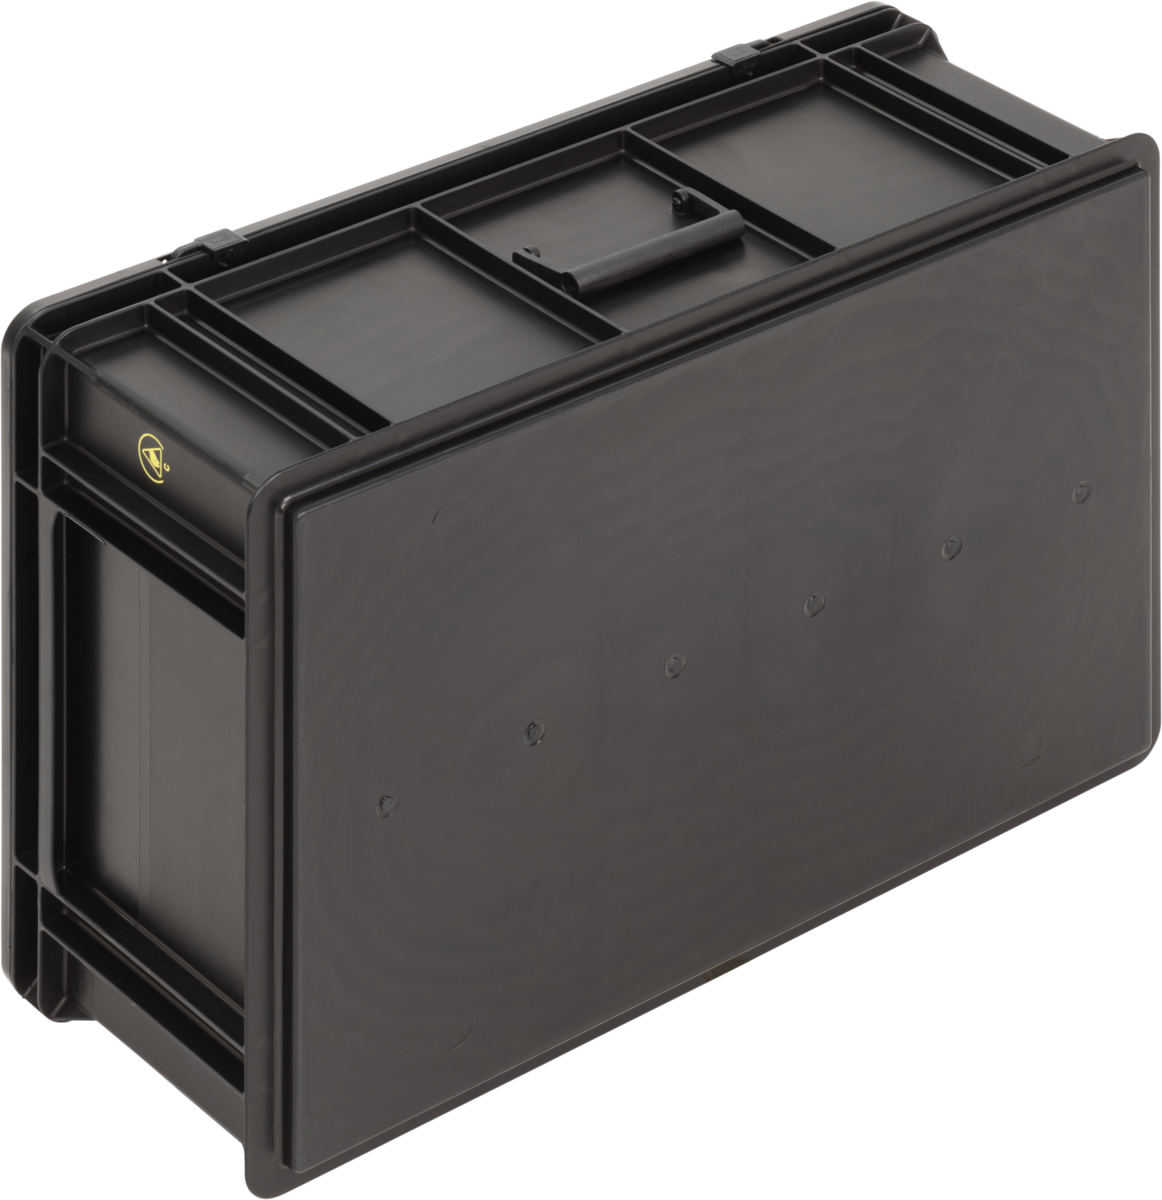 ESD-Safe-SGL-Norm-Carrying-Cases-Flat-Base-007-Ref.-6420.397.992_1004501_600x400x221_02_variant